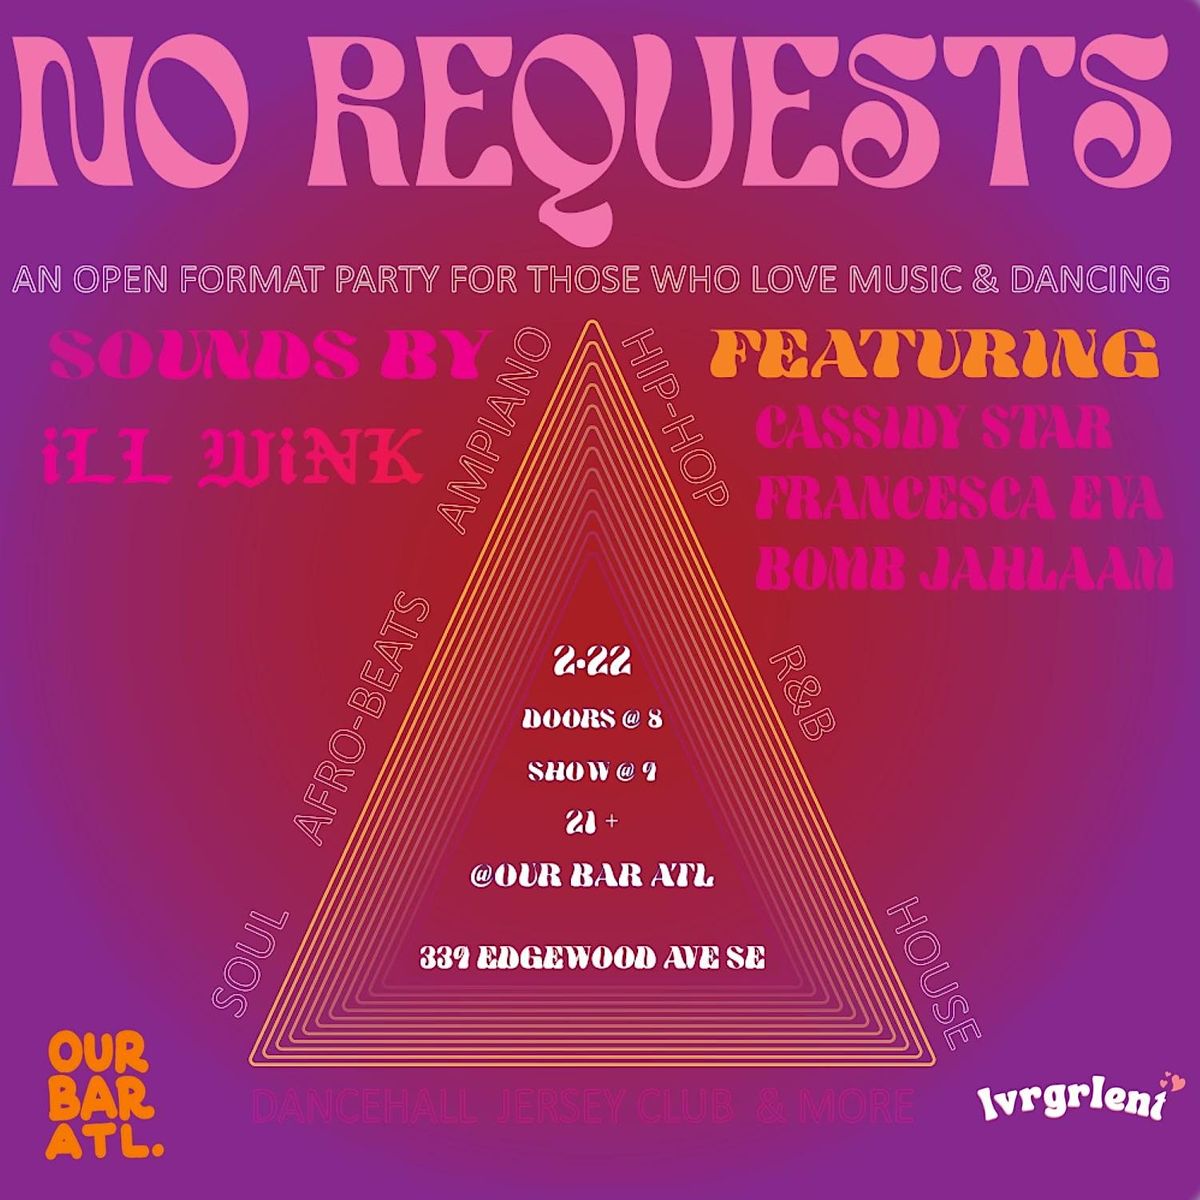 NO REQUESTS (An Open Format Party For Those Who Love Music & Dancing)